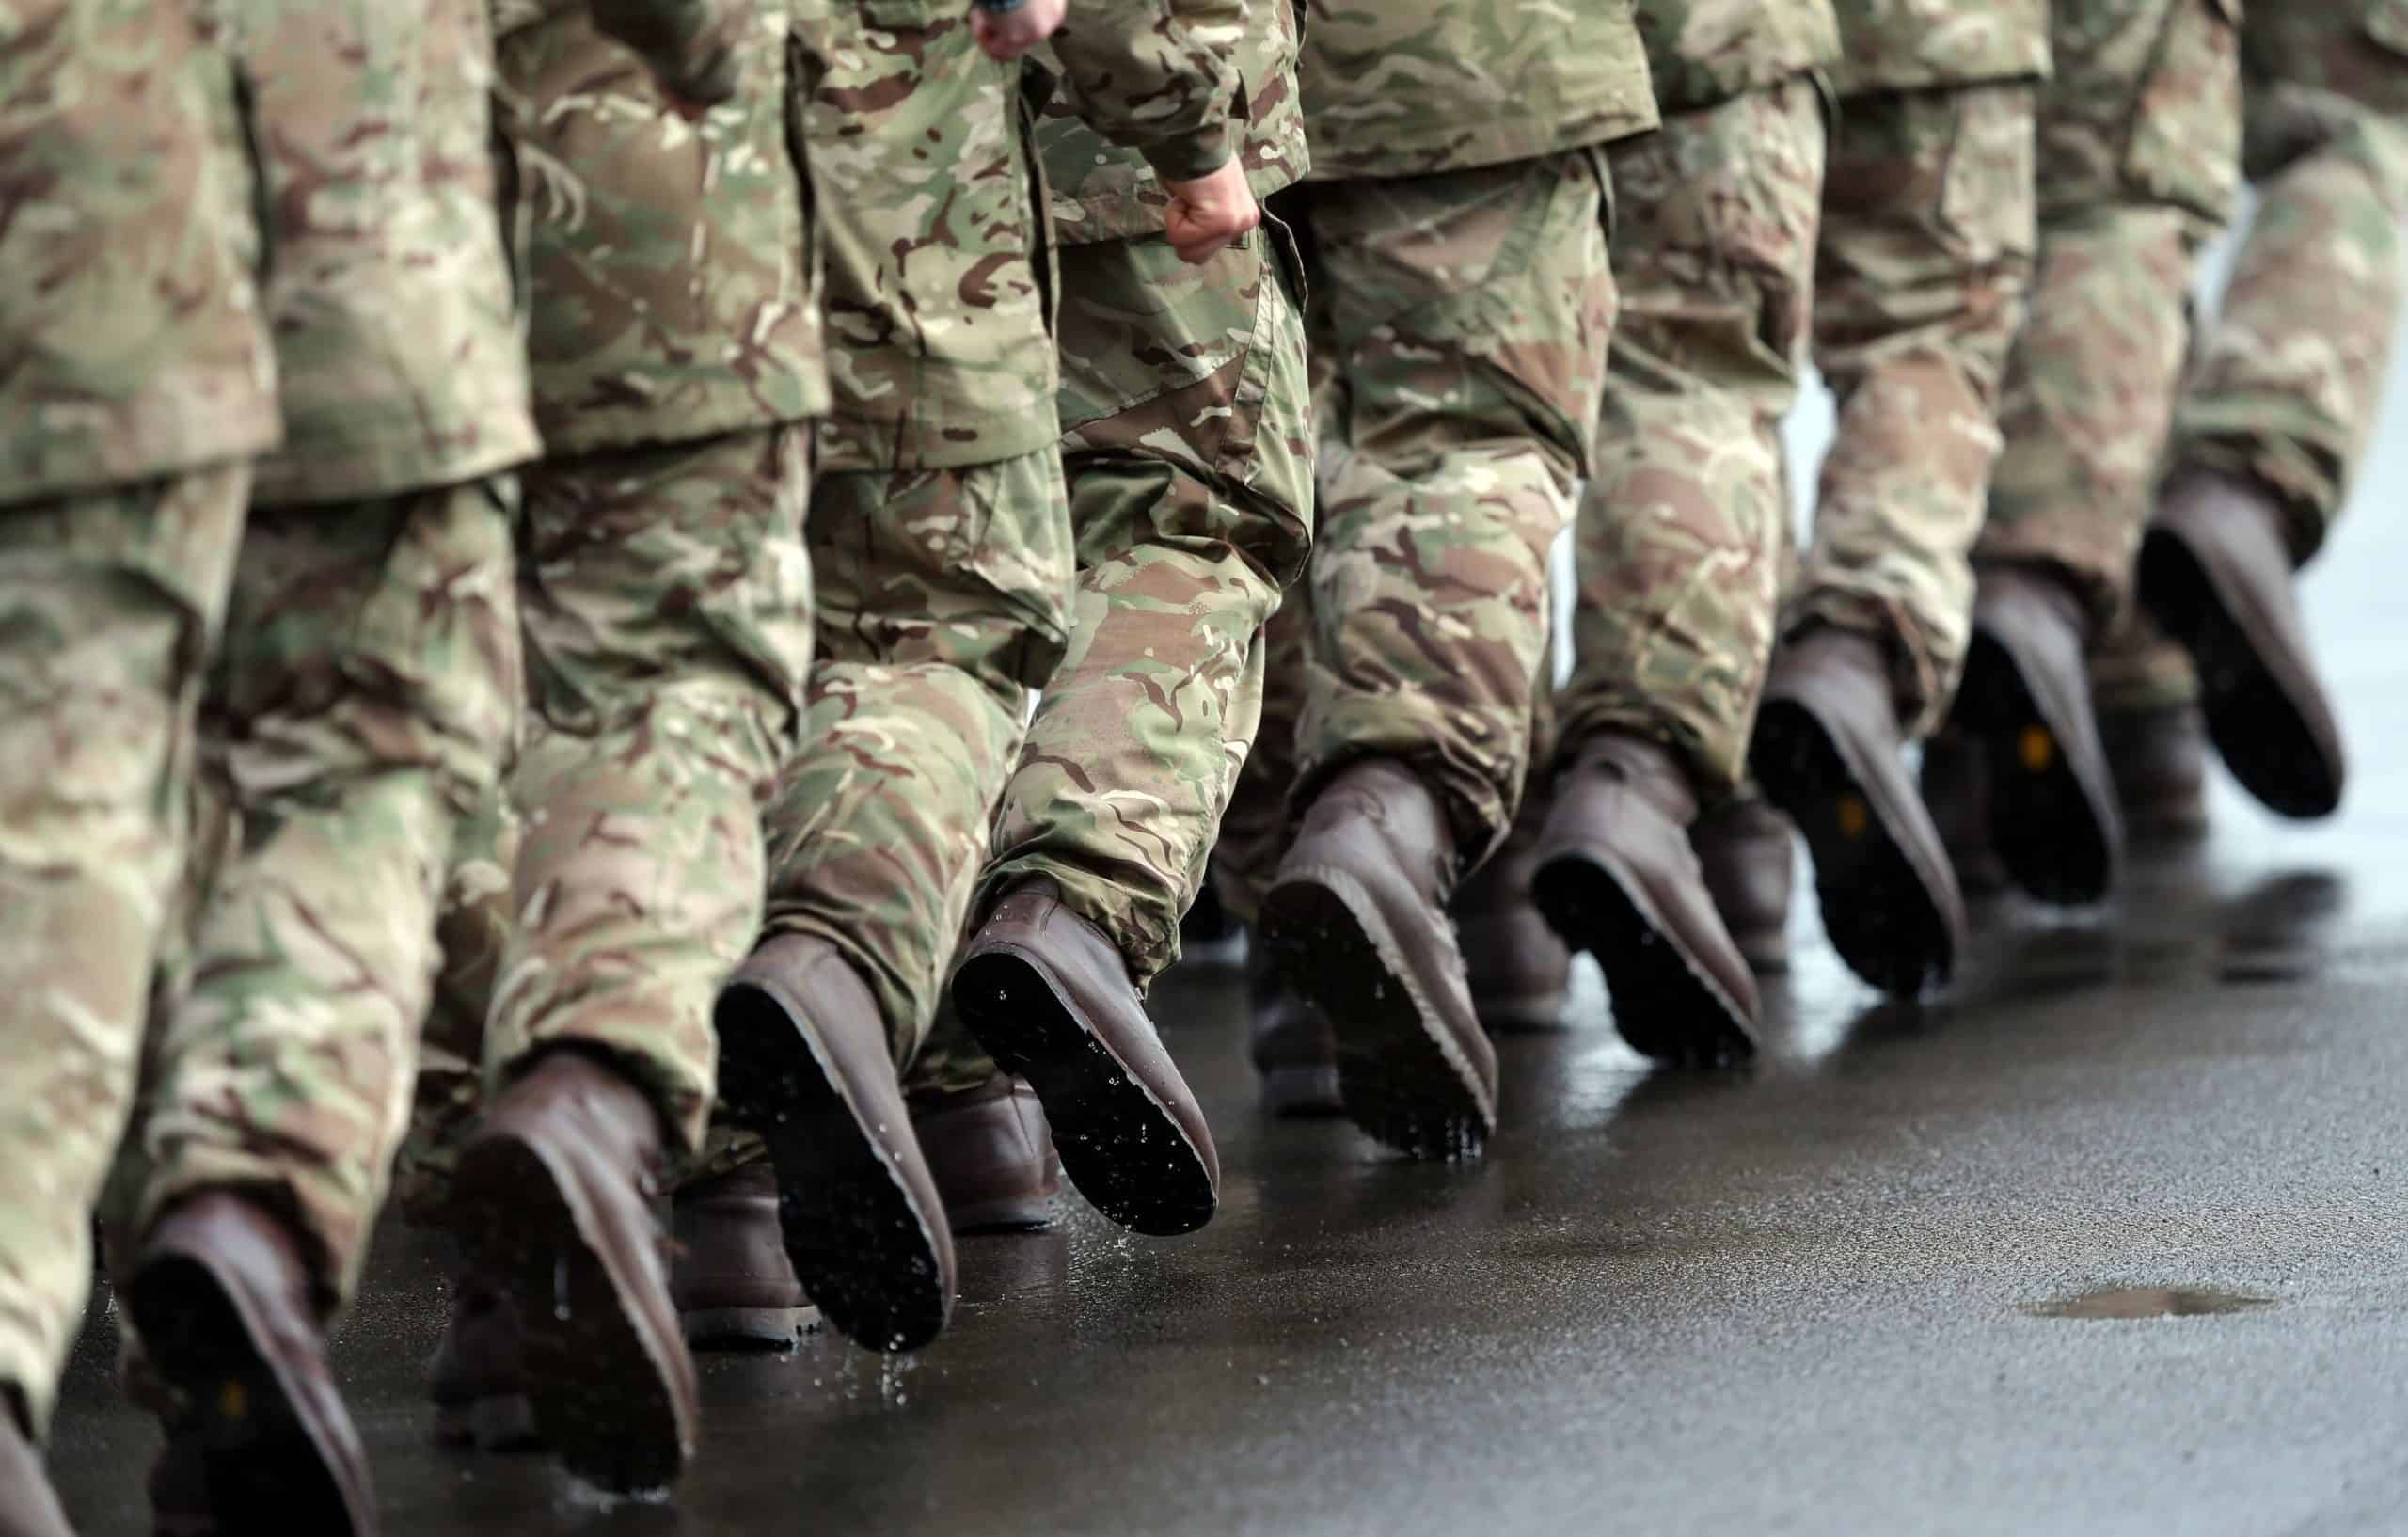 Soldier convicted of raping a sleeping woman in his barracks